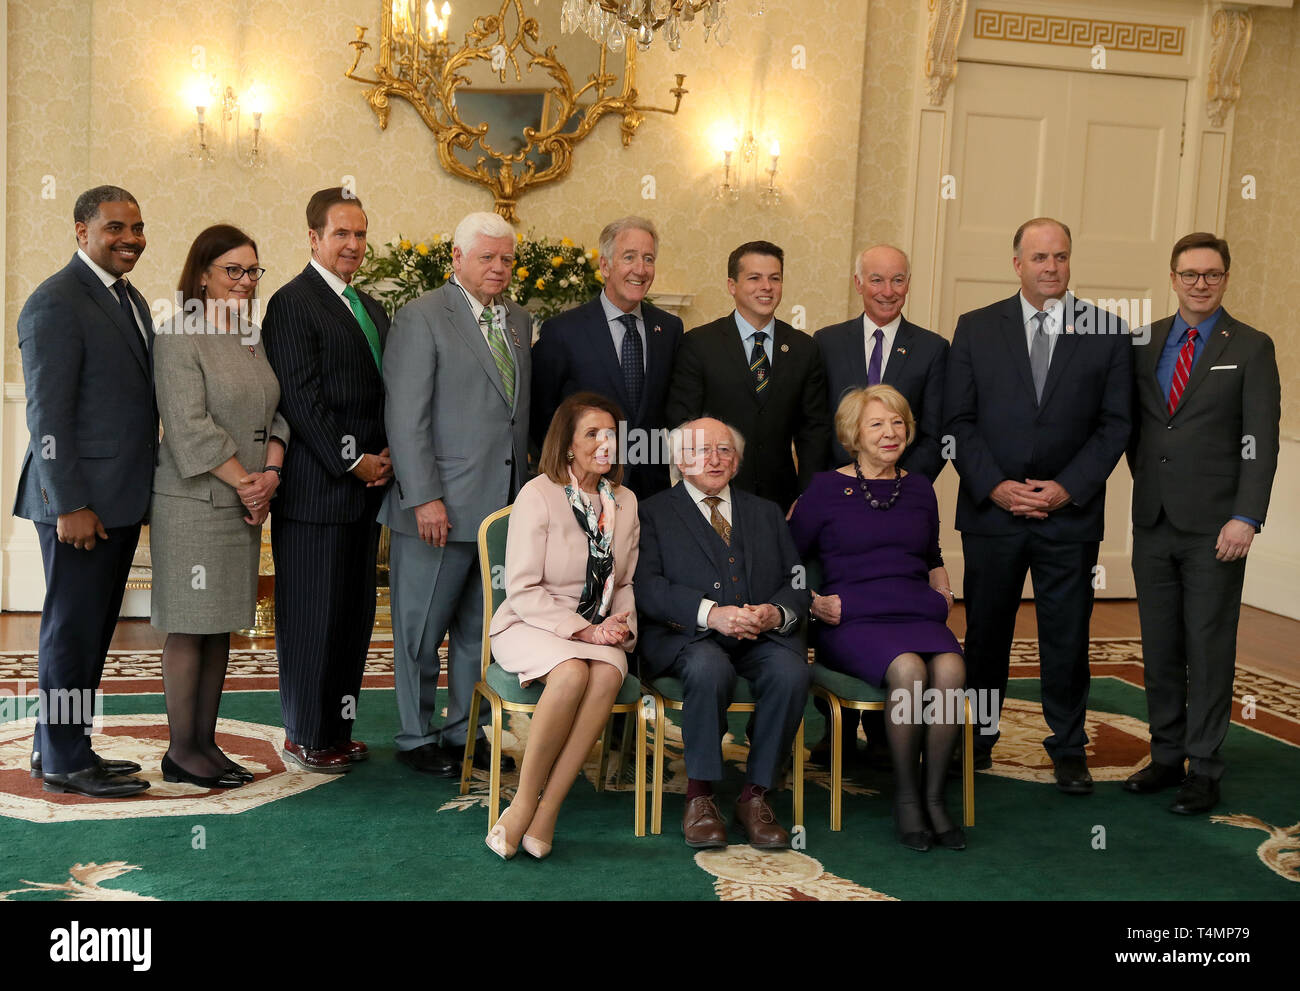 US House of Representatives speaker Nancy Pelosi (front left) is received by President Michael D Higgins (front centre) and his wife Sabina (front right) along with members of her Congressional Delegation at Aras an Uachtarain in Phoenix Park, Dublin, as part of her four-day visit to Ireland and Northern Ireland. Stock Photo